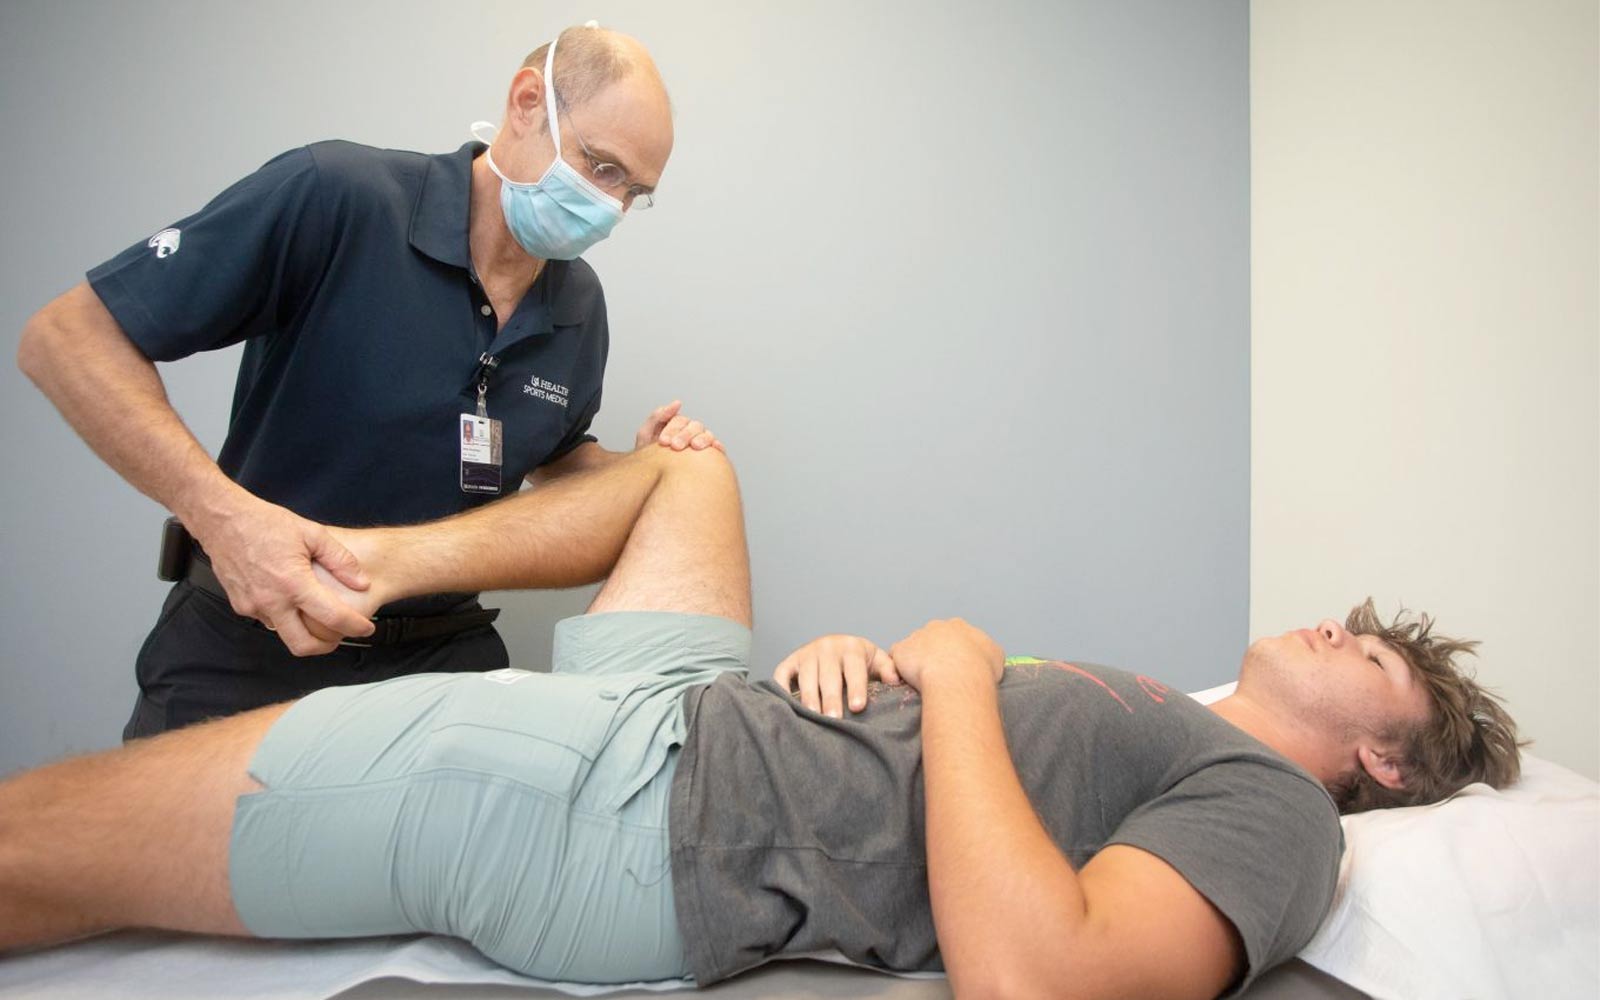 USA Health To Provide Sports Medicine For MCPSS